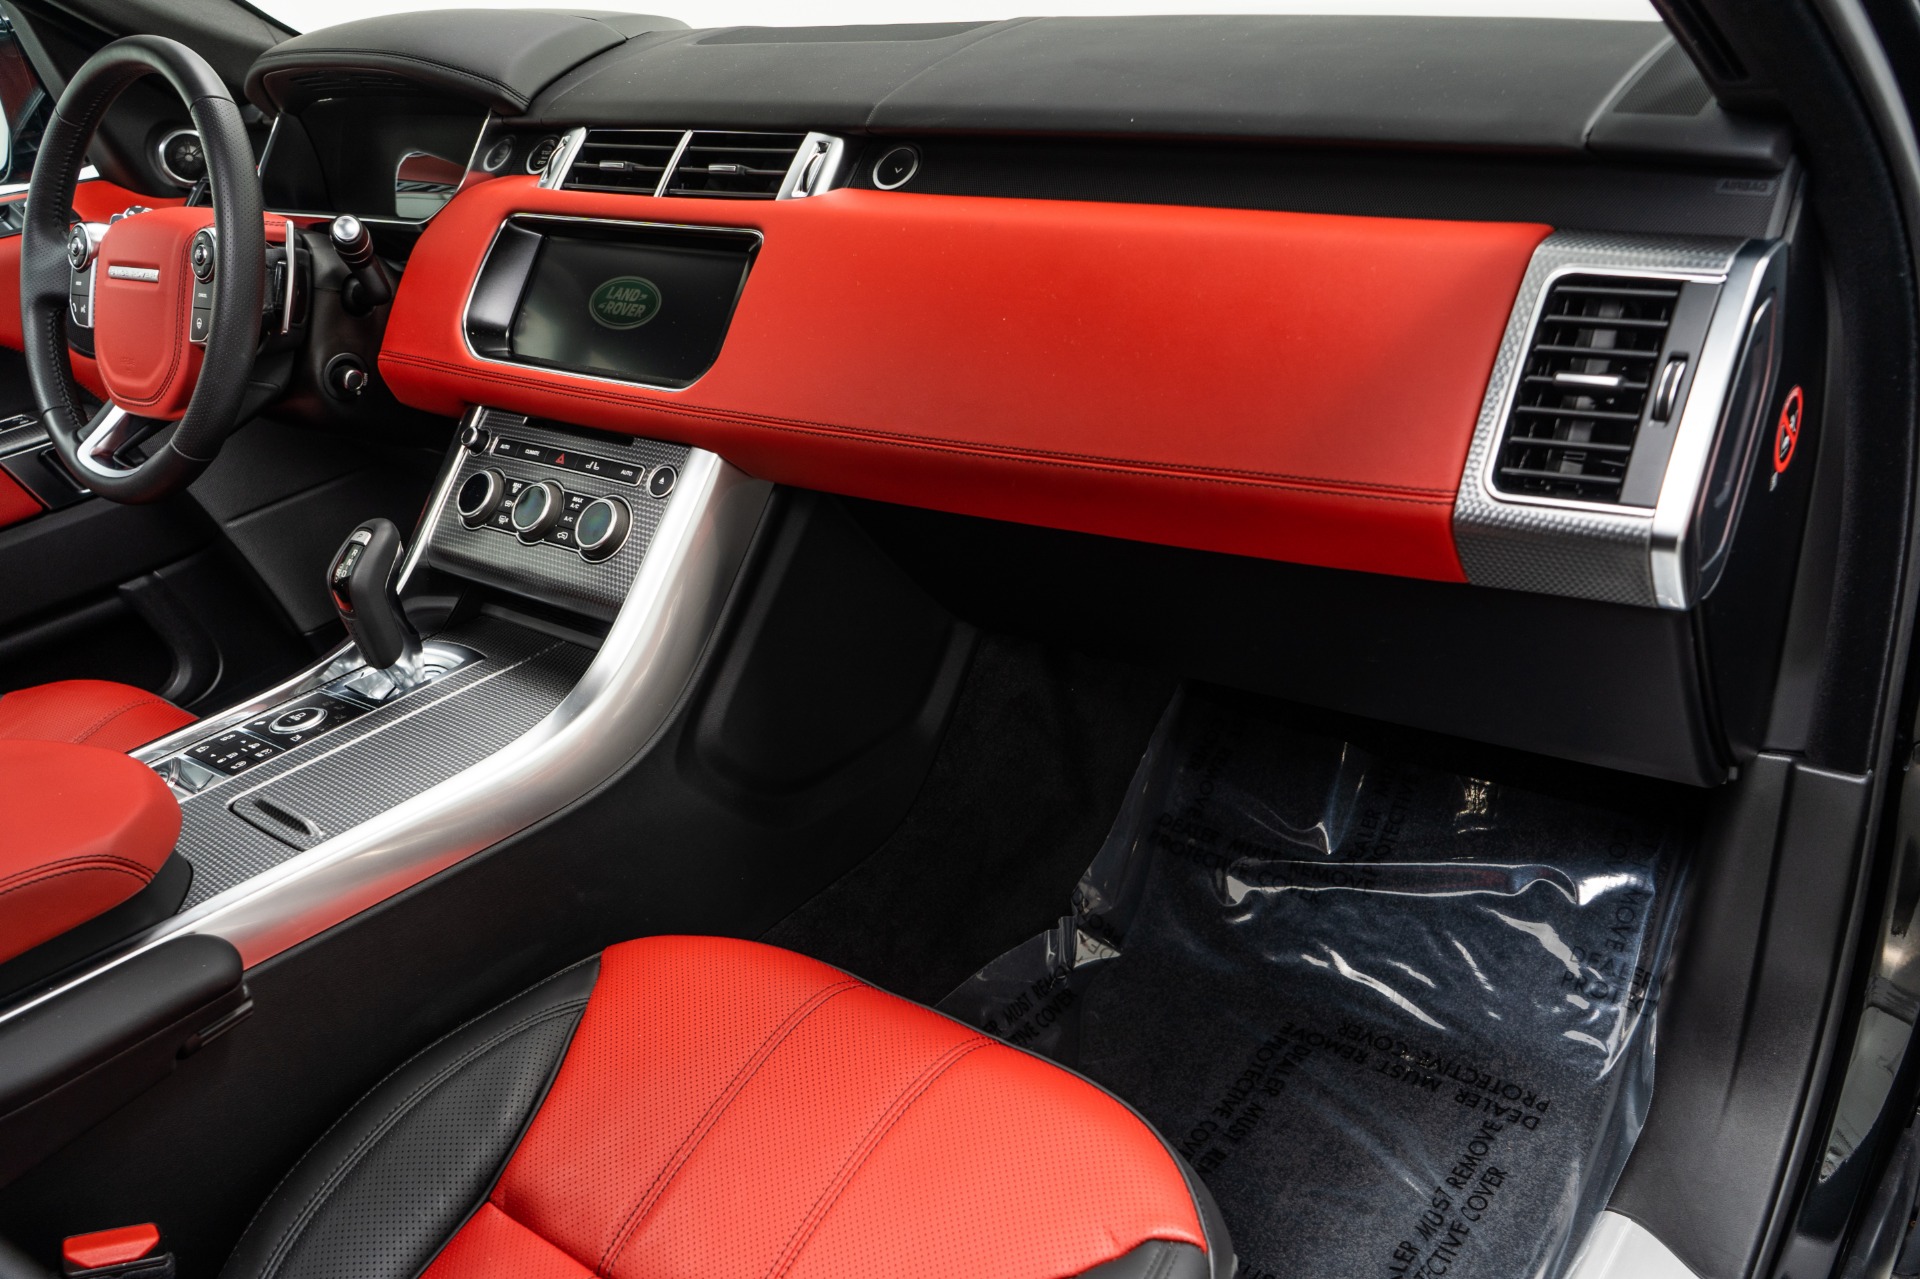 2017 Range Rover Sport's interior spied for the first time